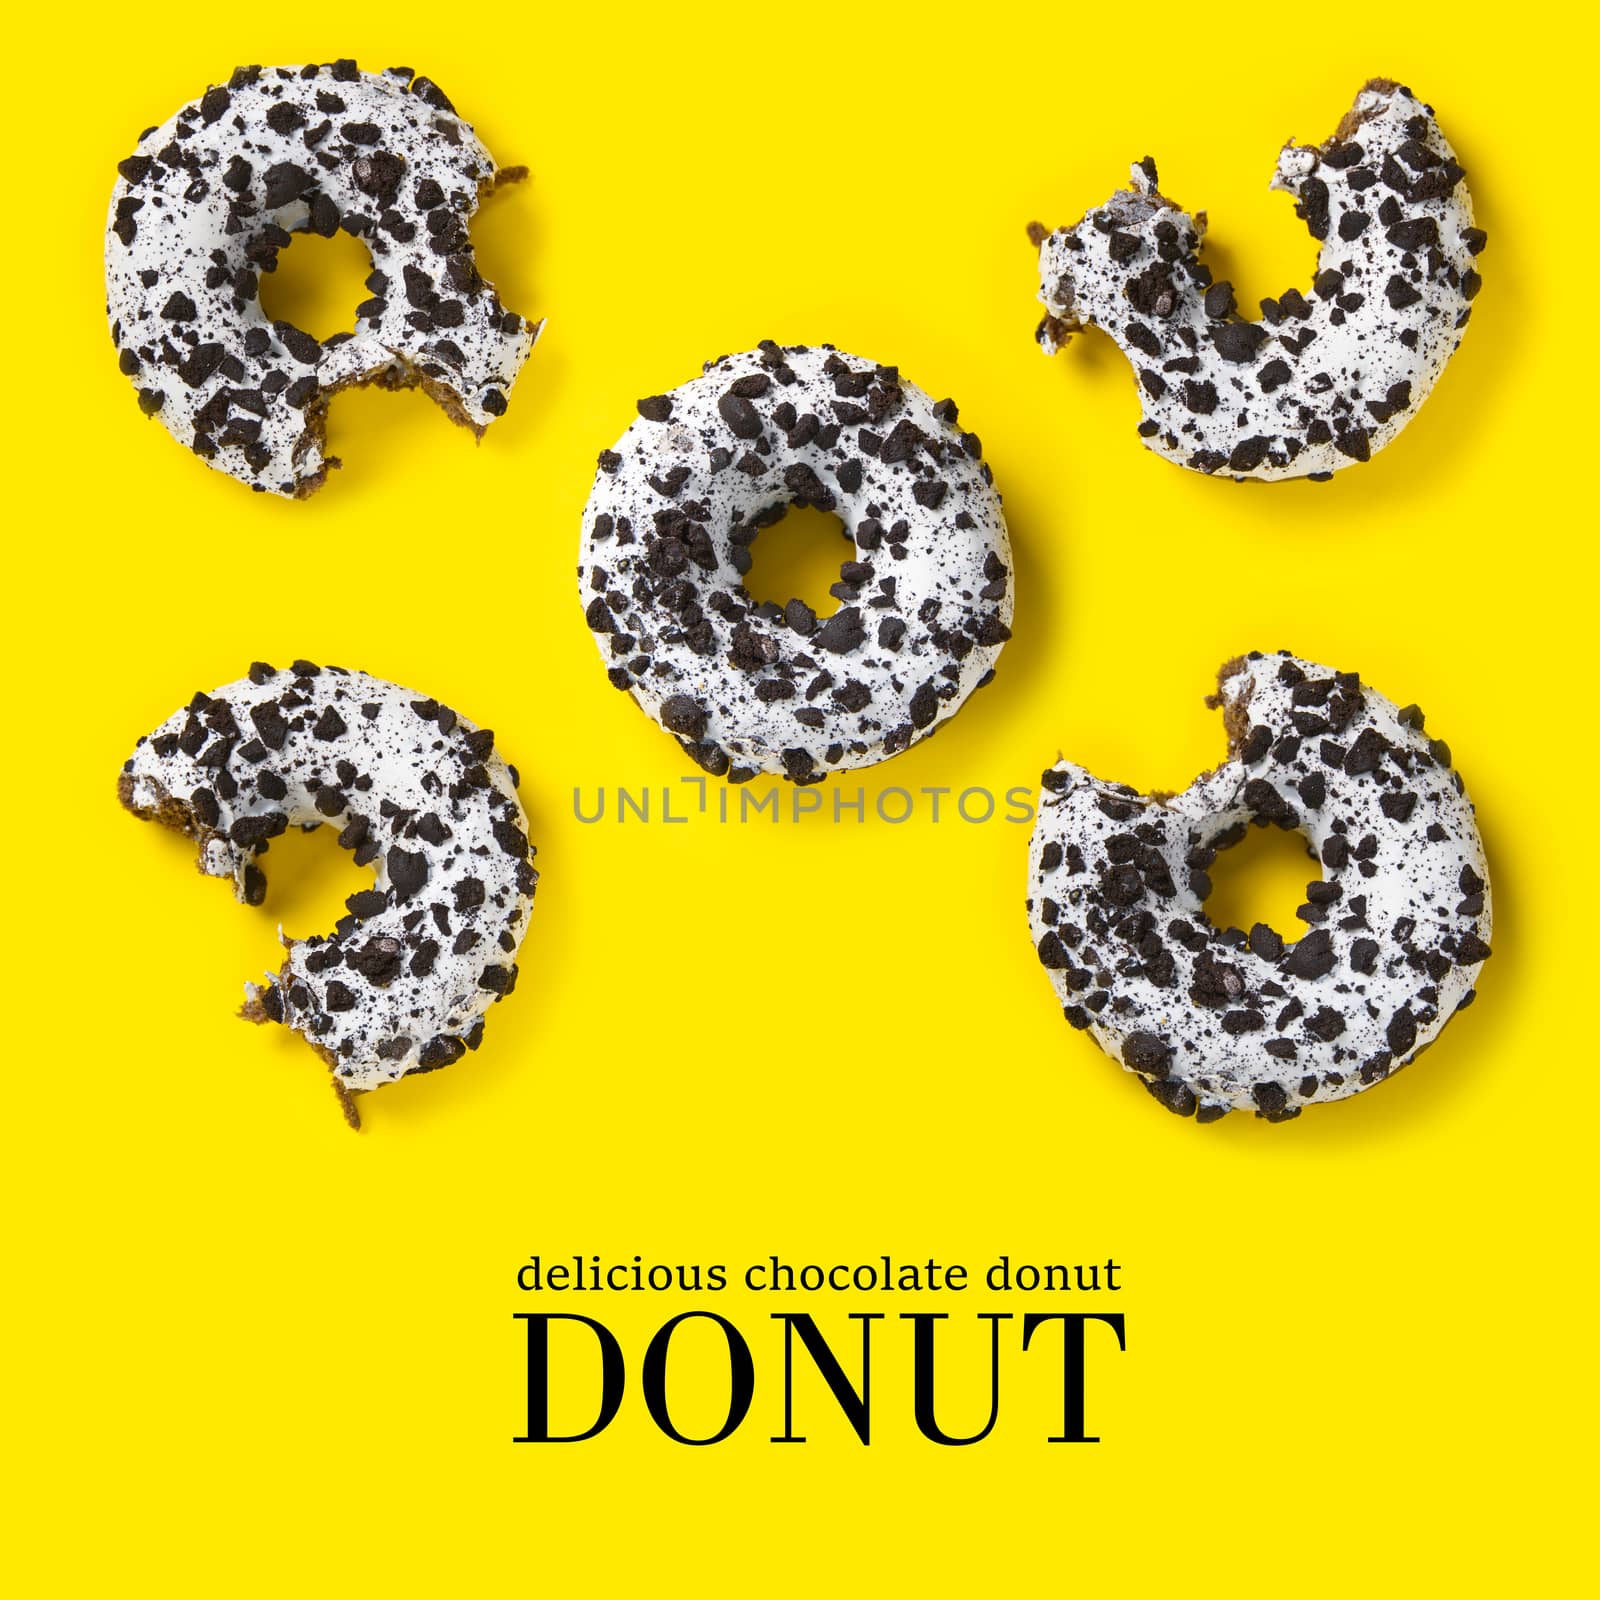 creative composition of donuts on a yellow background. Flat lay delicious nibbled chocolate donuts and simple text.